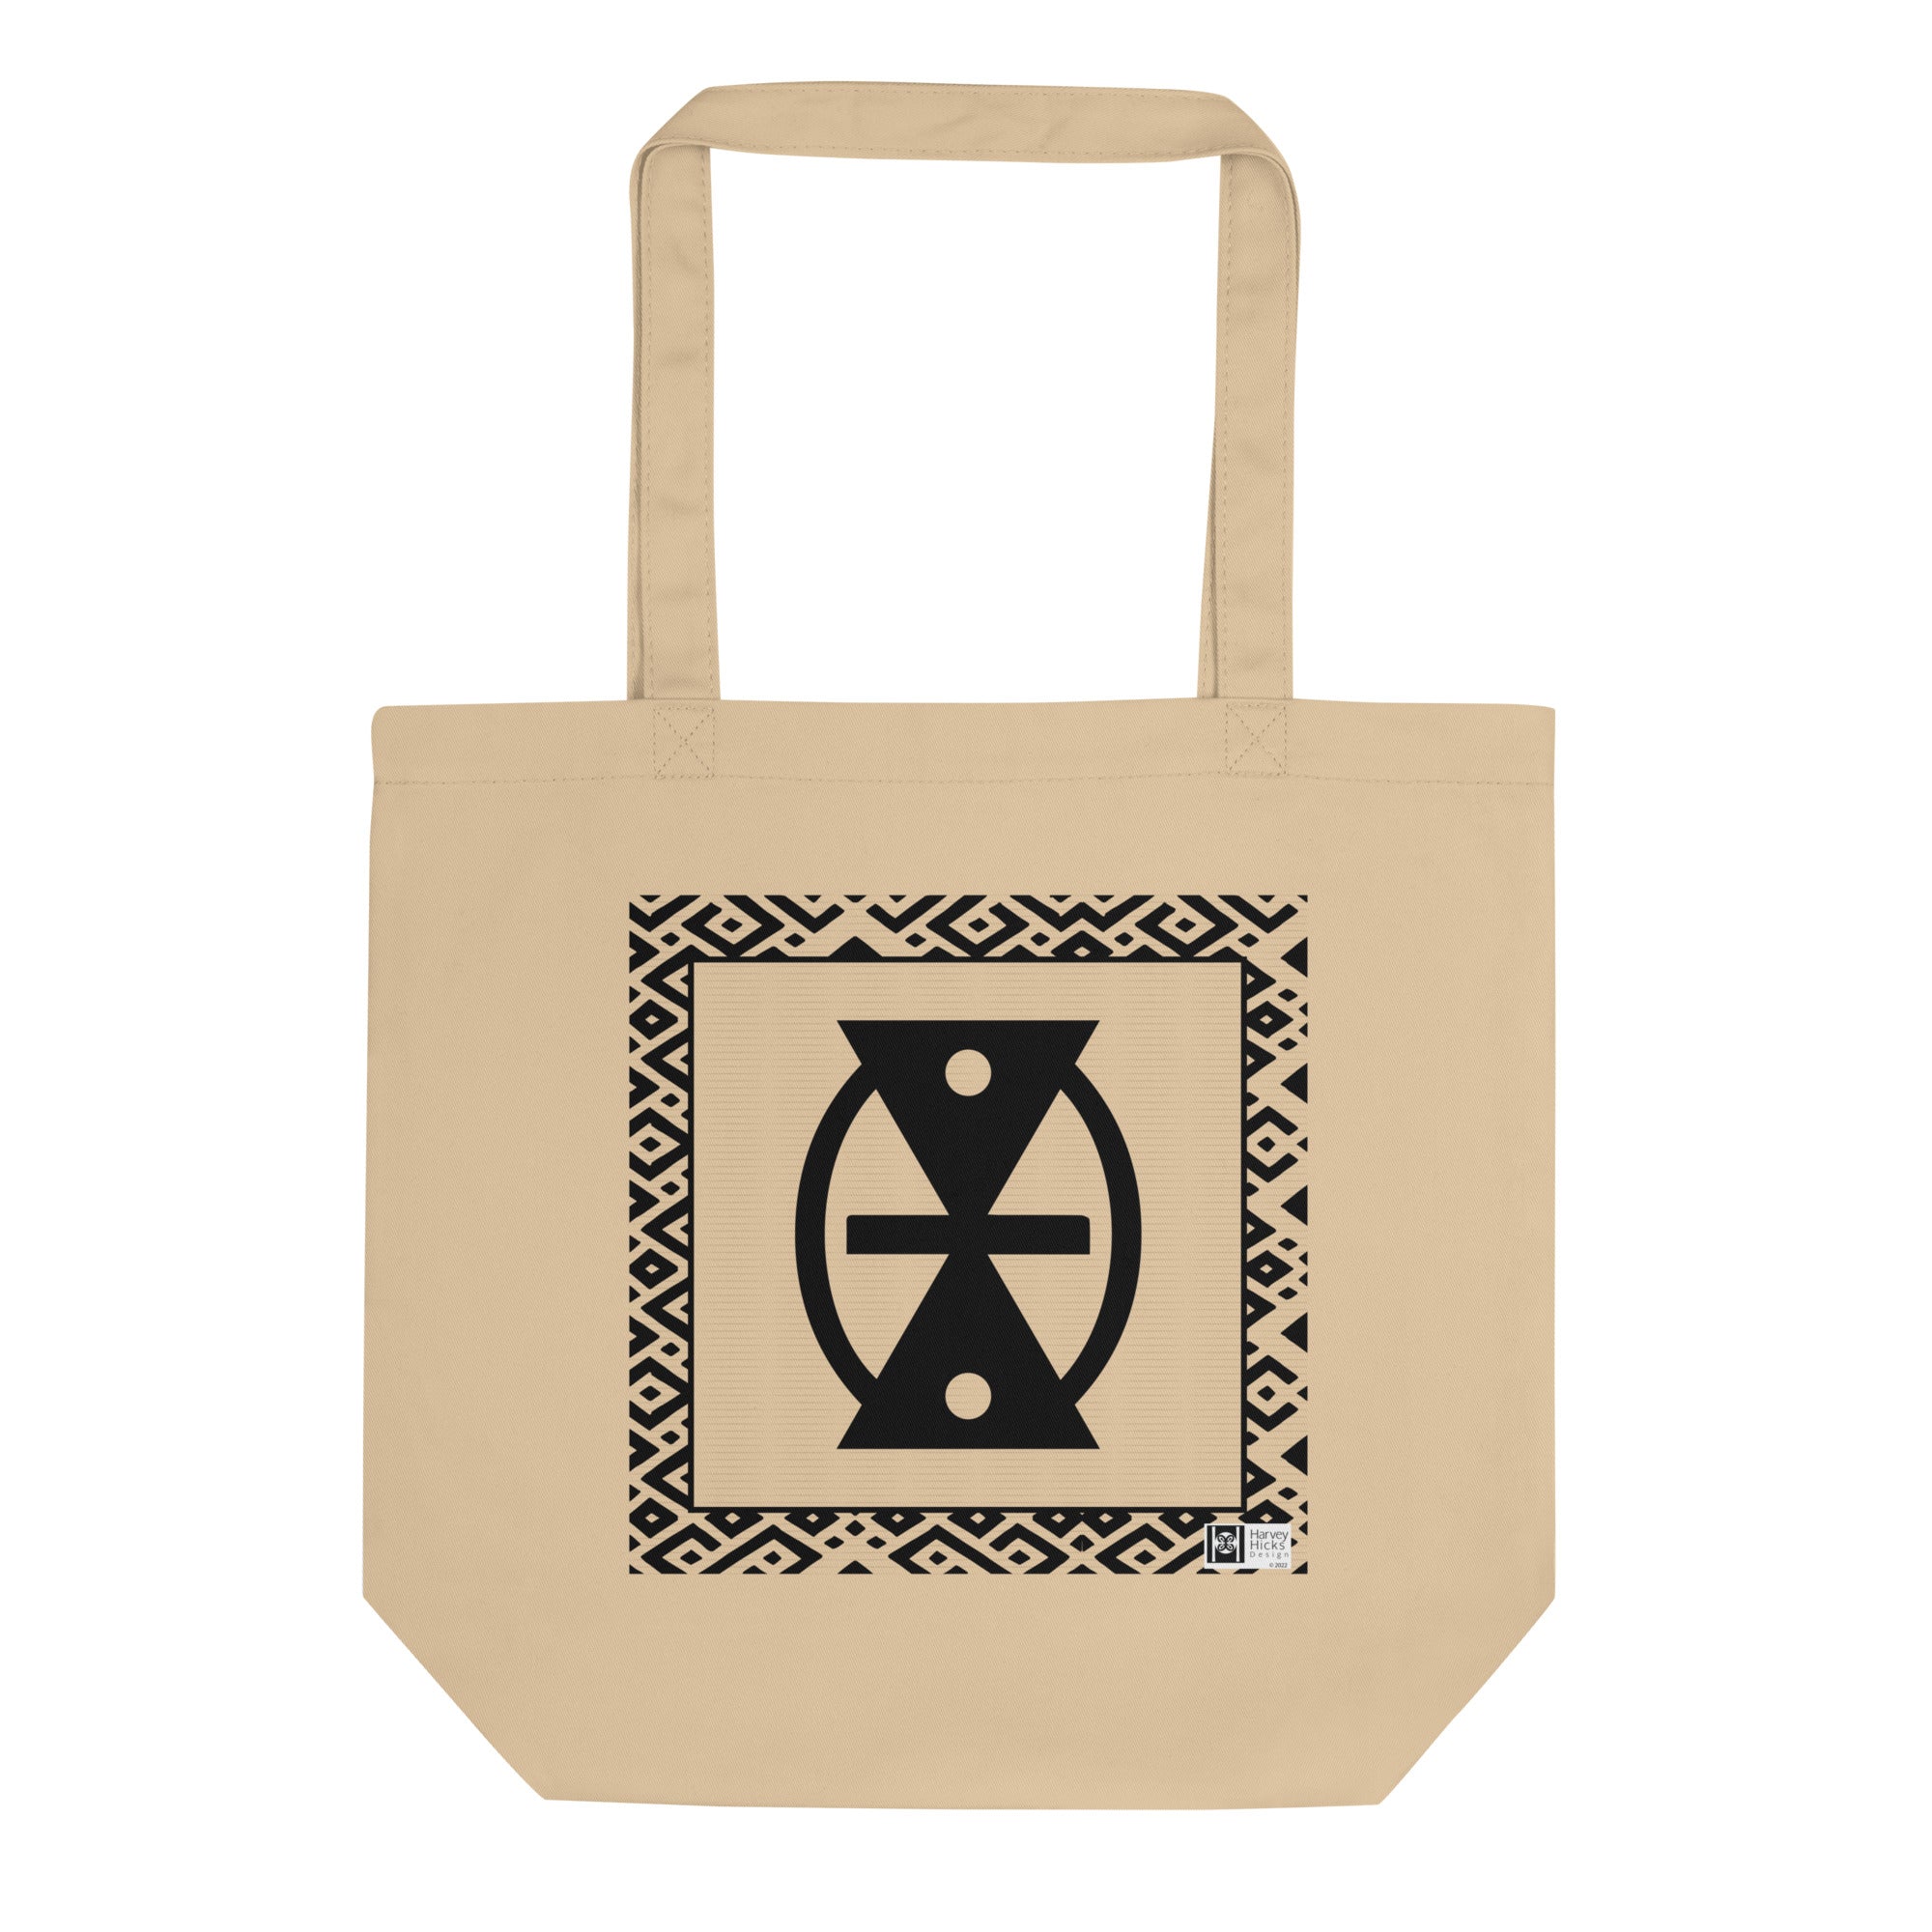 100% cotton Eco Tote Bag, featuring the Adinkra symbol for the fluidity of time, NO TEXT